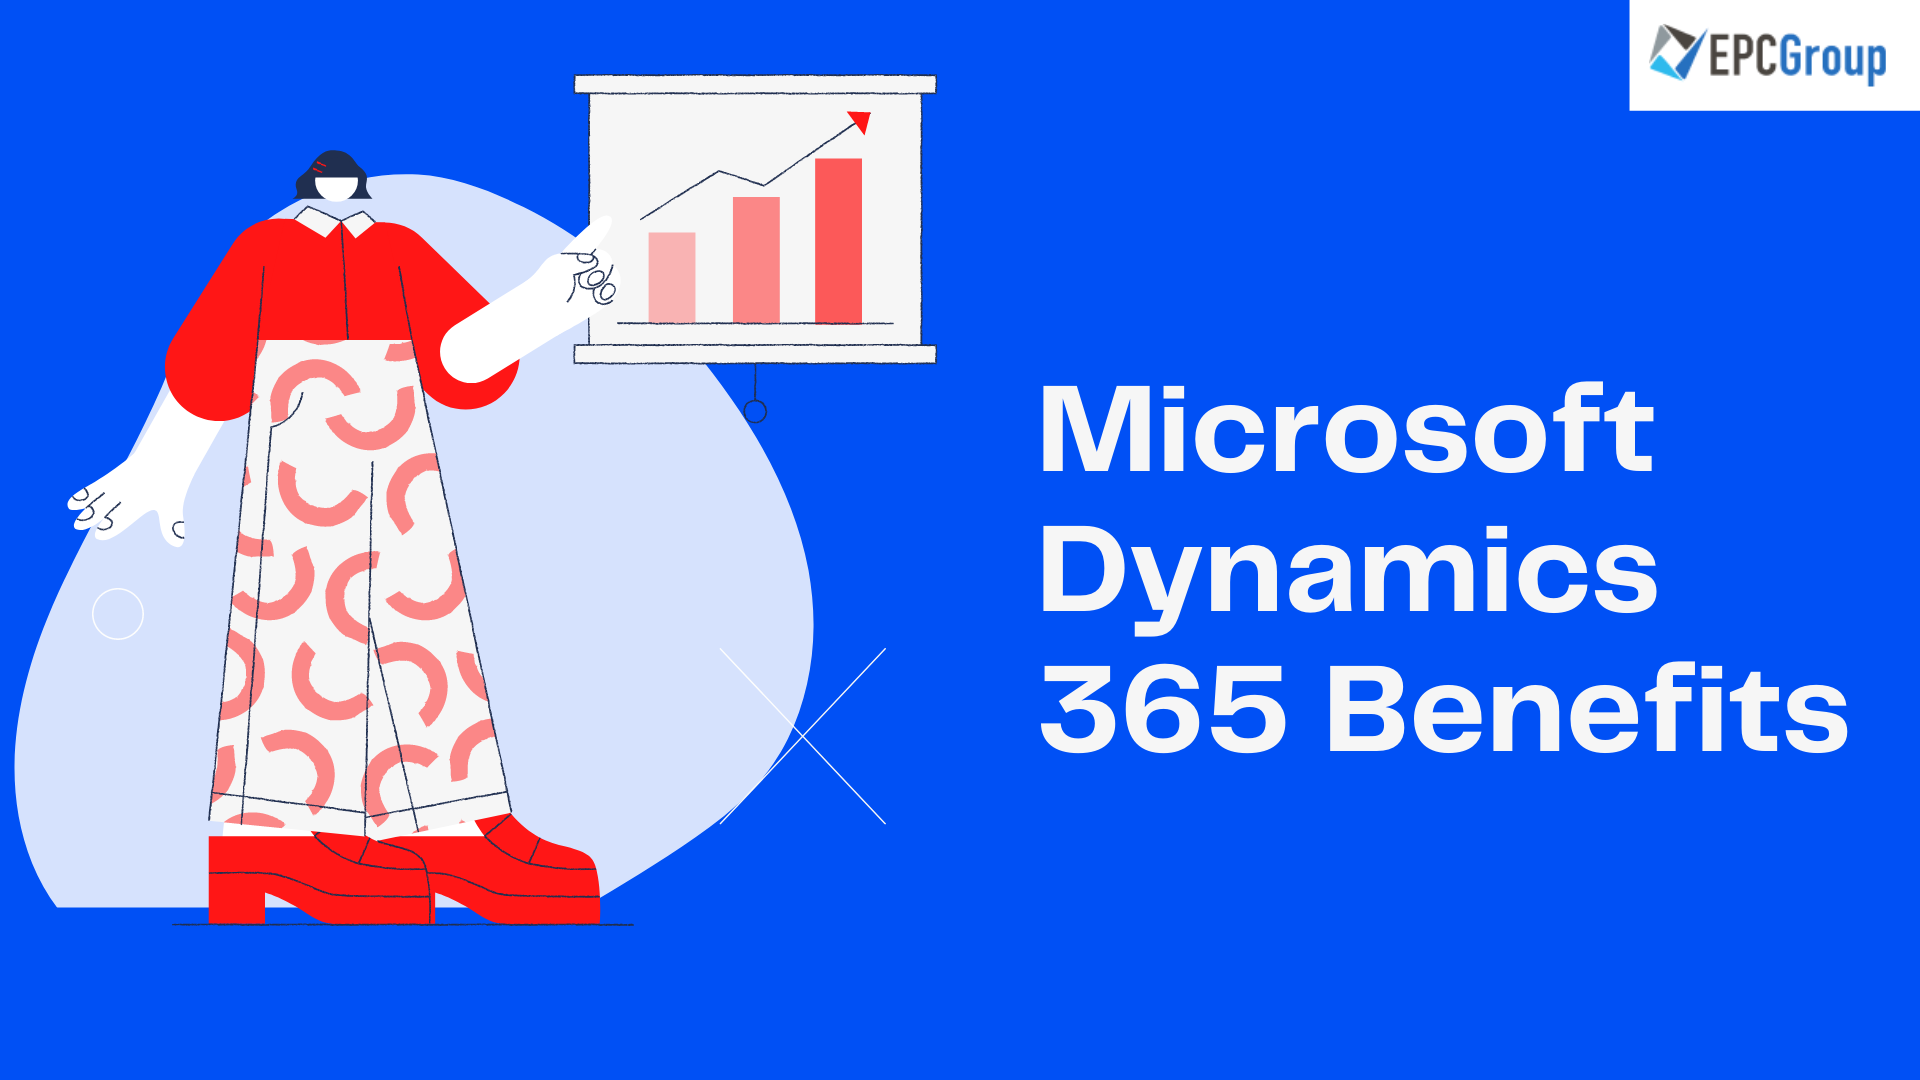 What Are The Benefits That Microsoft Dynamics 365 has?